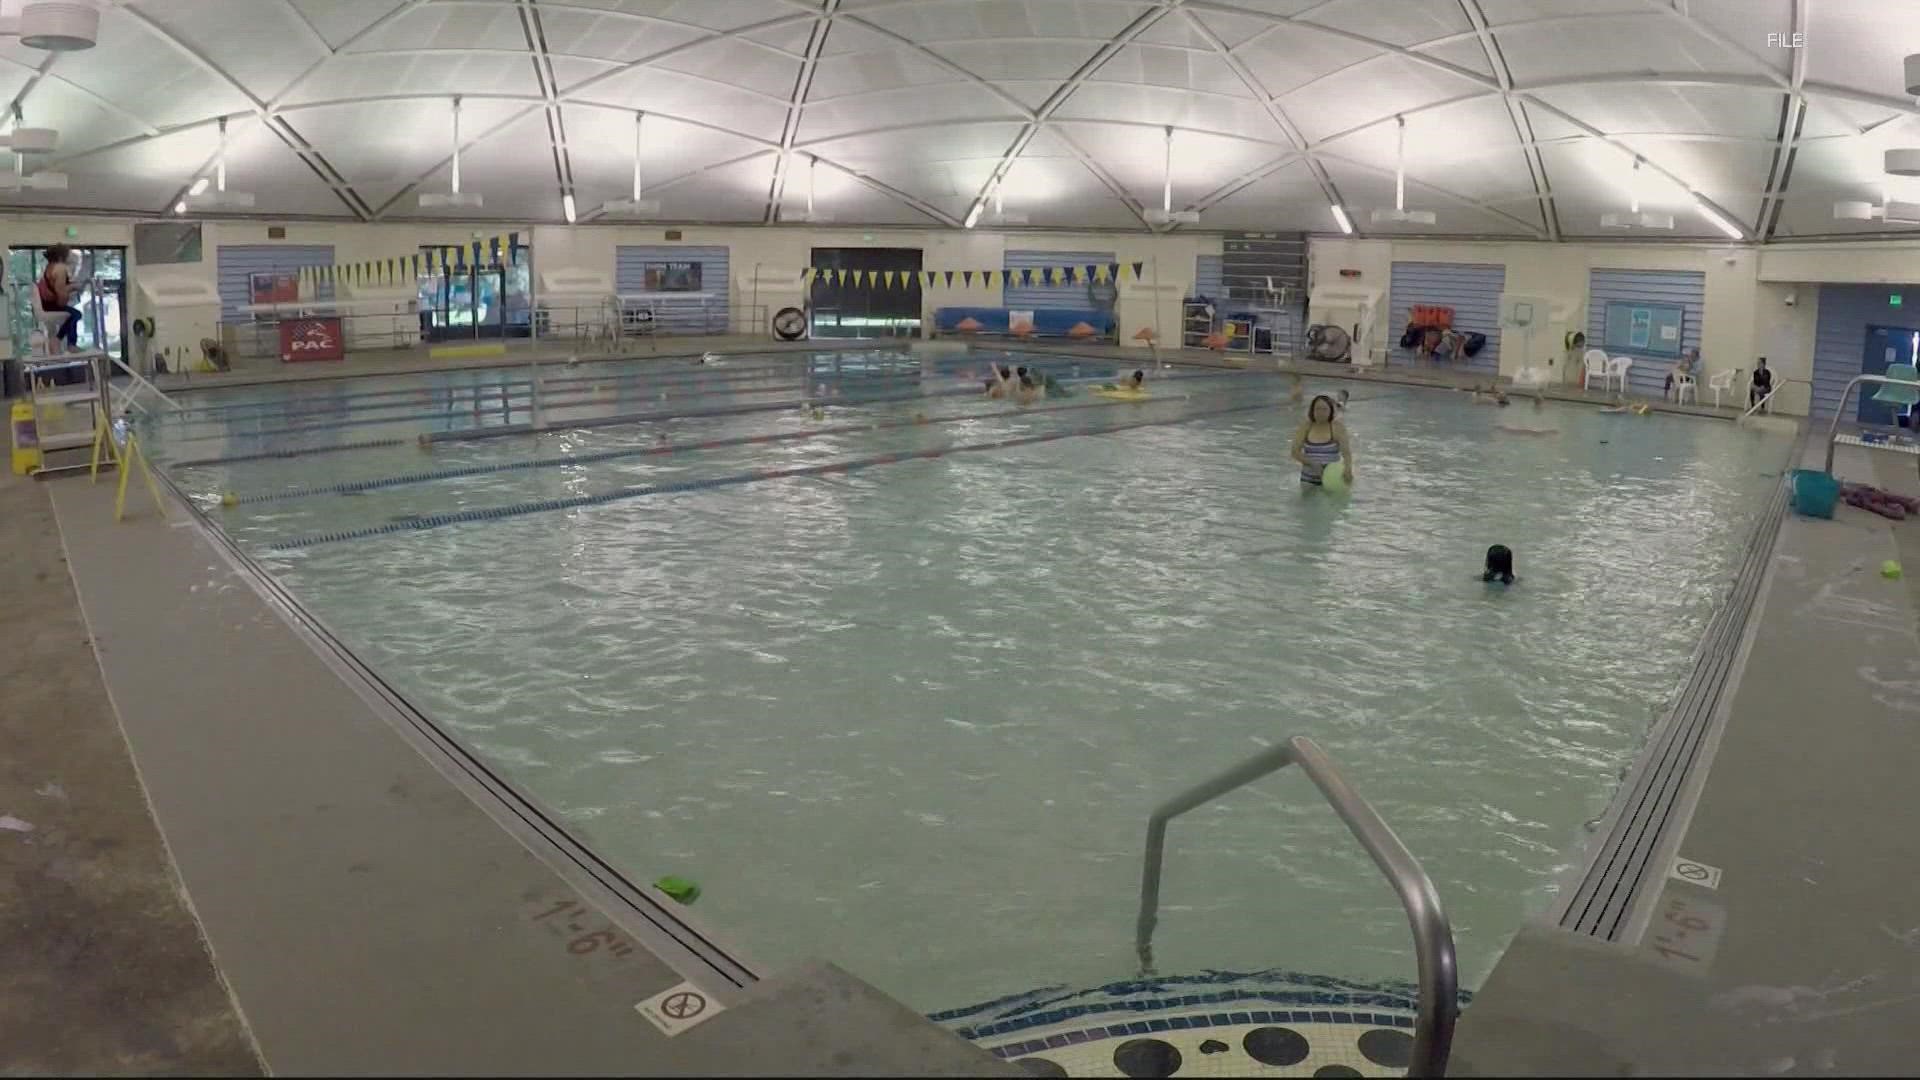 North Portland's only pool closed indefinitely last summer after inspections found major issues with the one-hundred-year-old building.